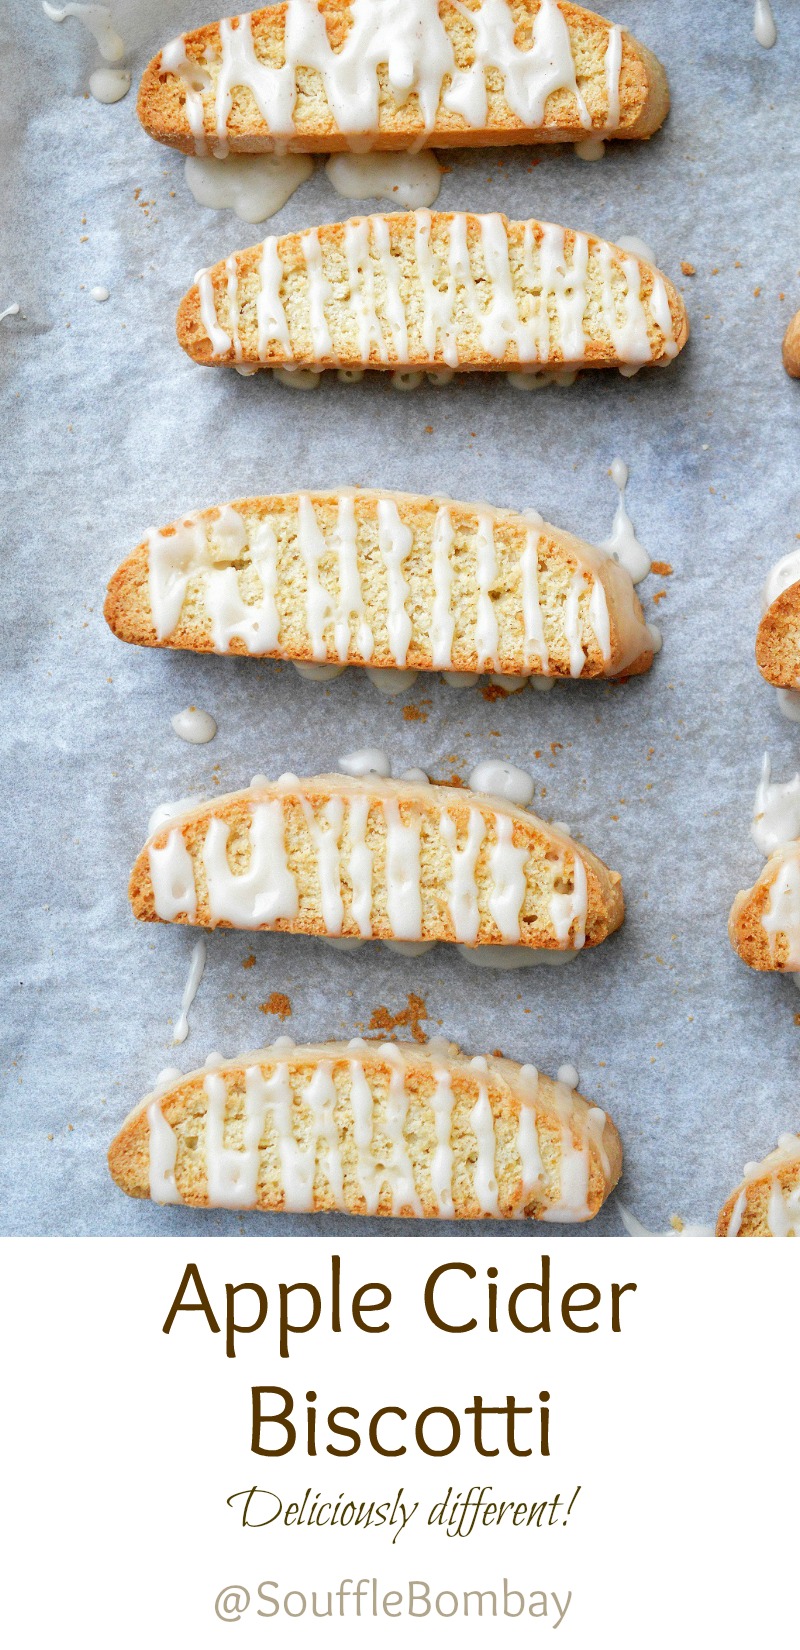 Apple Cider Biscotti are different, delicious and make a great food gift! 